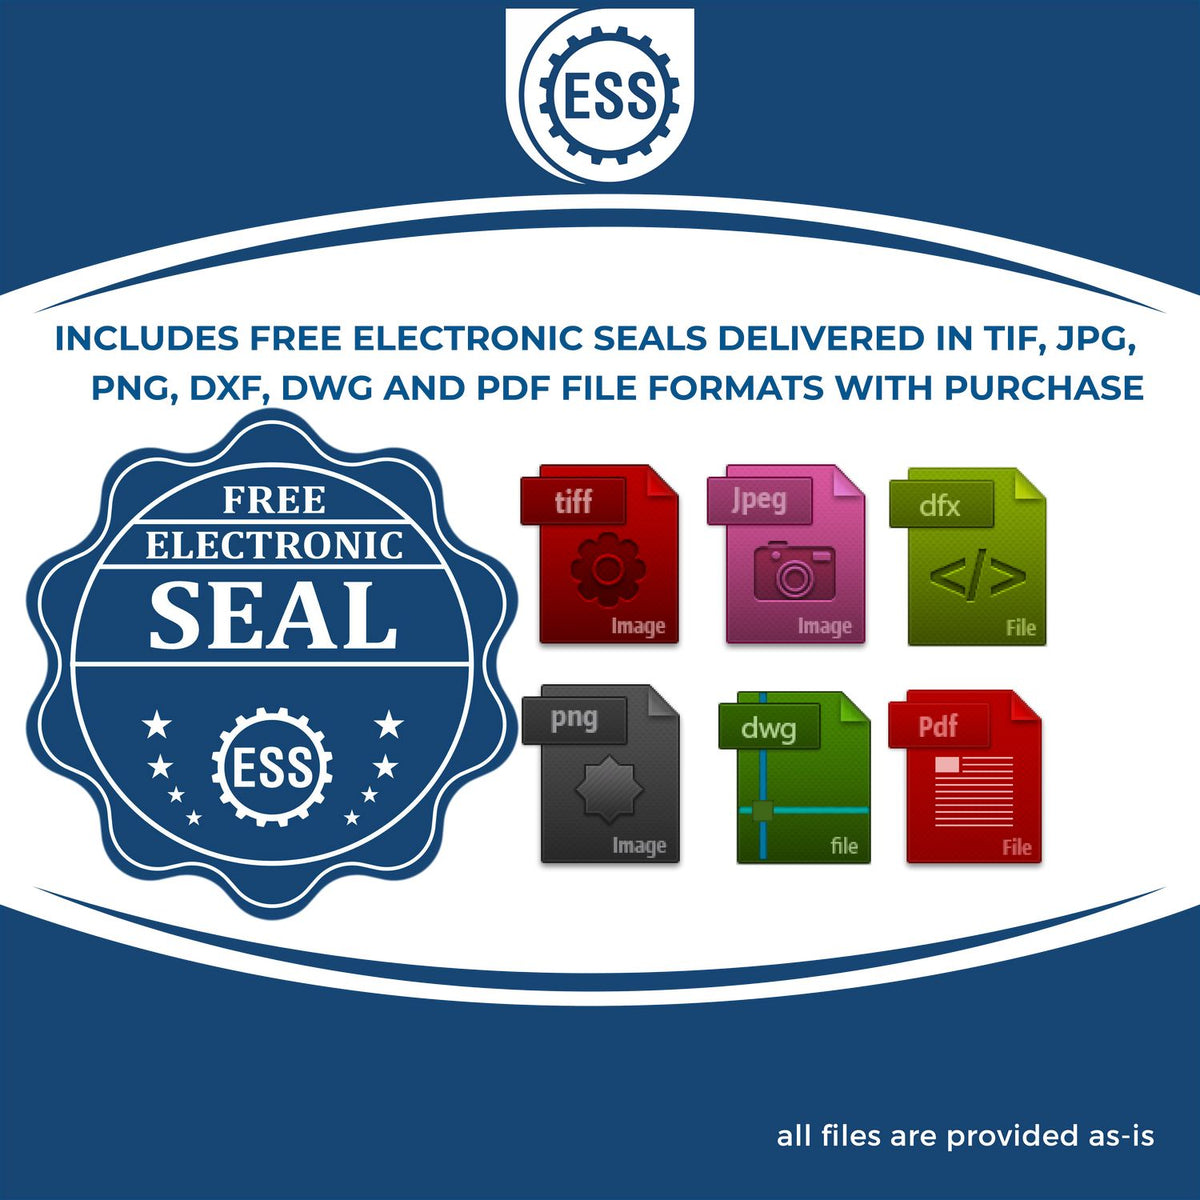 An infographic for the free electronic seal for the Georgia Professional Geologist Seal Stamp illustrating the different file type icons such as DXF, DWG, TIF, JPG and PNG.